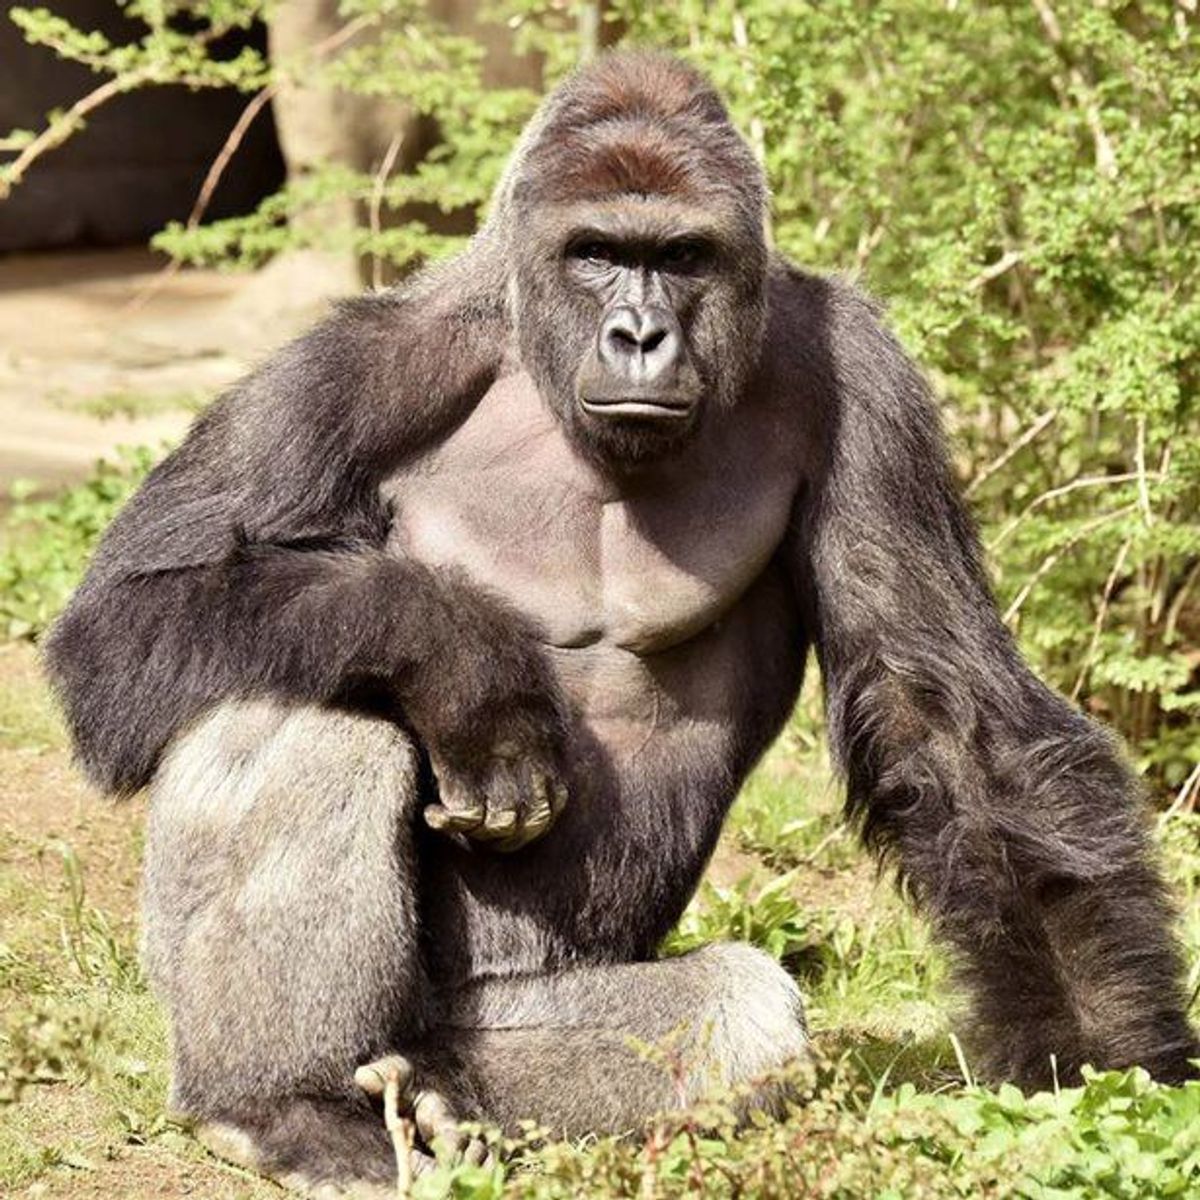 Why The Harambe Shenanigans Need To Stop